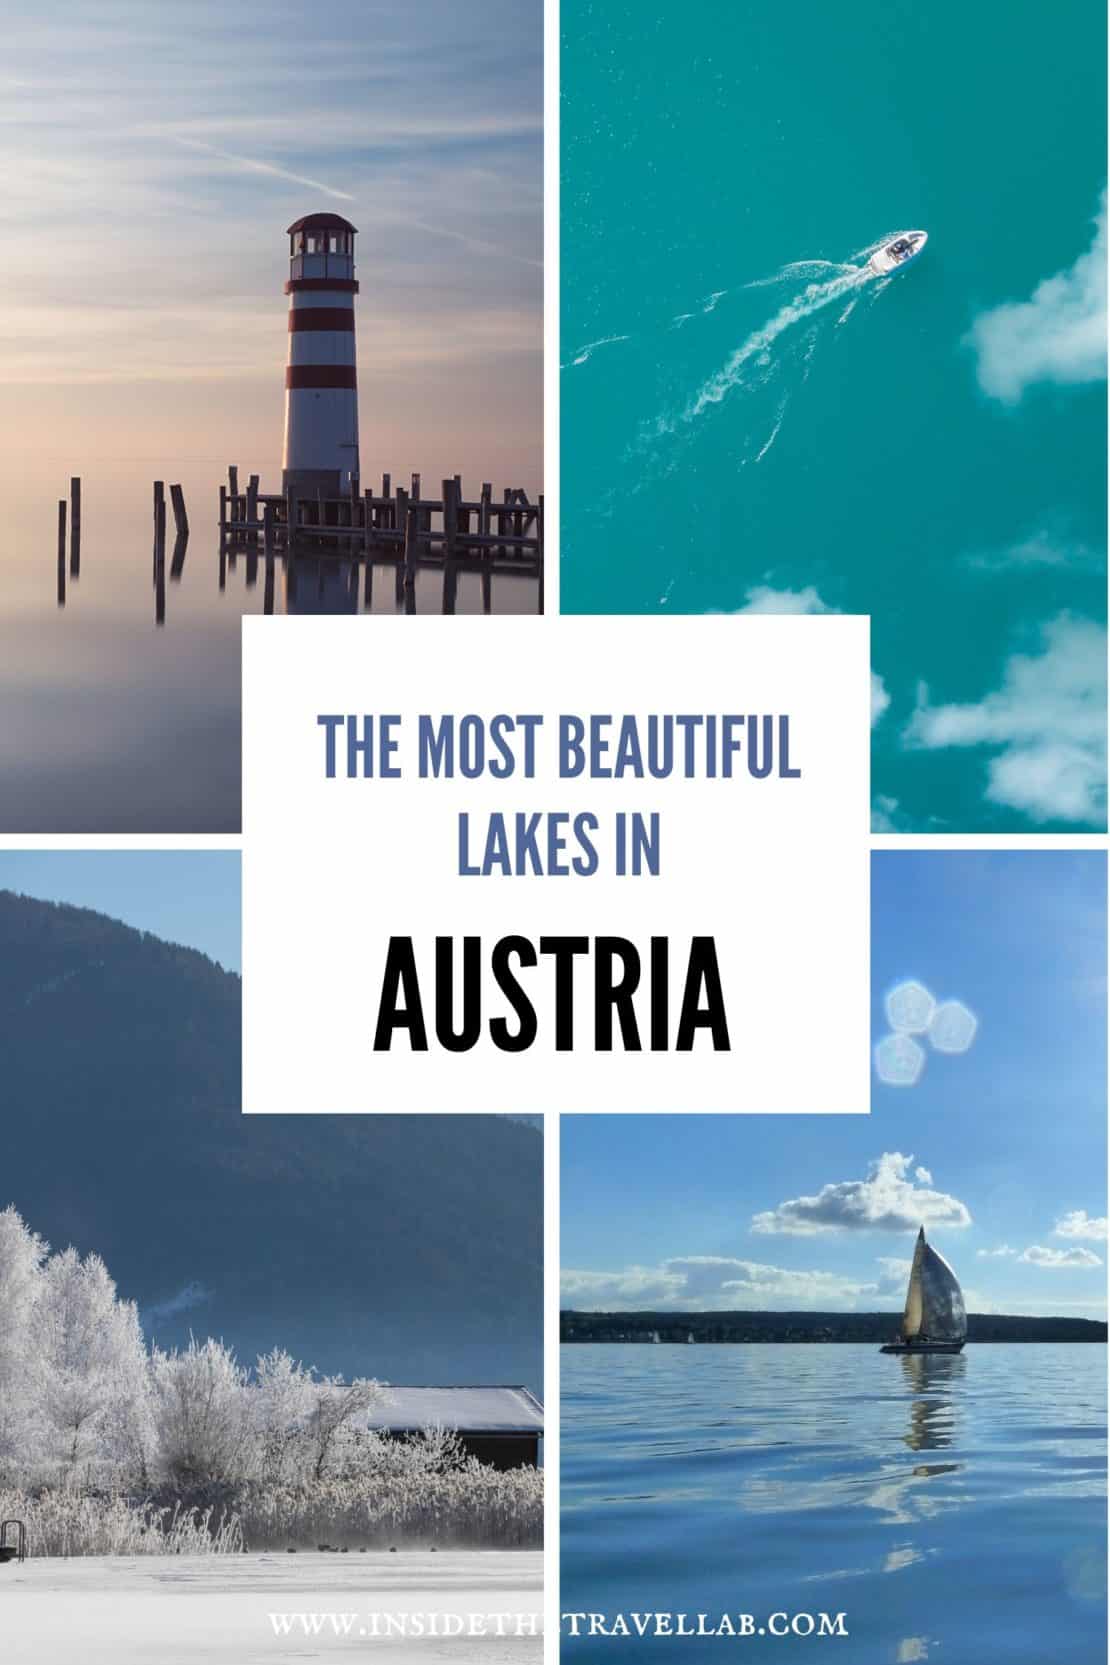 Cover image for the most beautiful lakes in Austria. A great travel guide to Austria's most beautiful lakes, covering both summer and winter destinations.